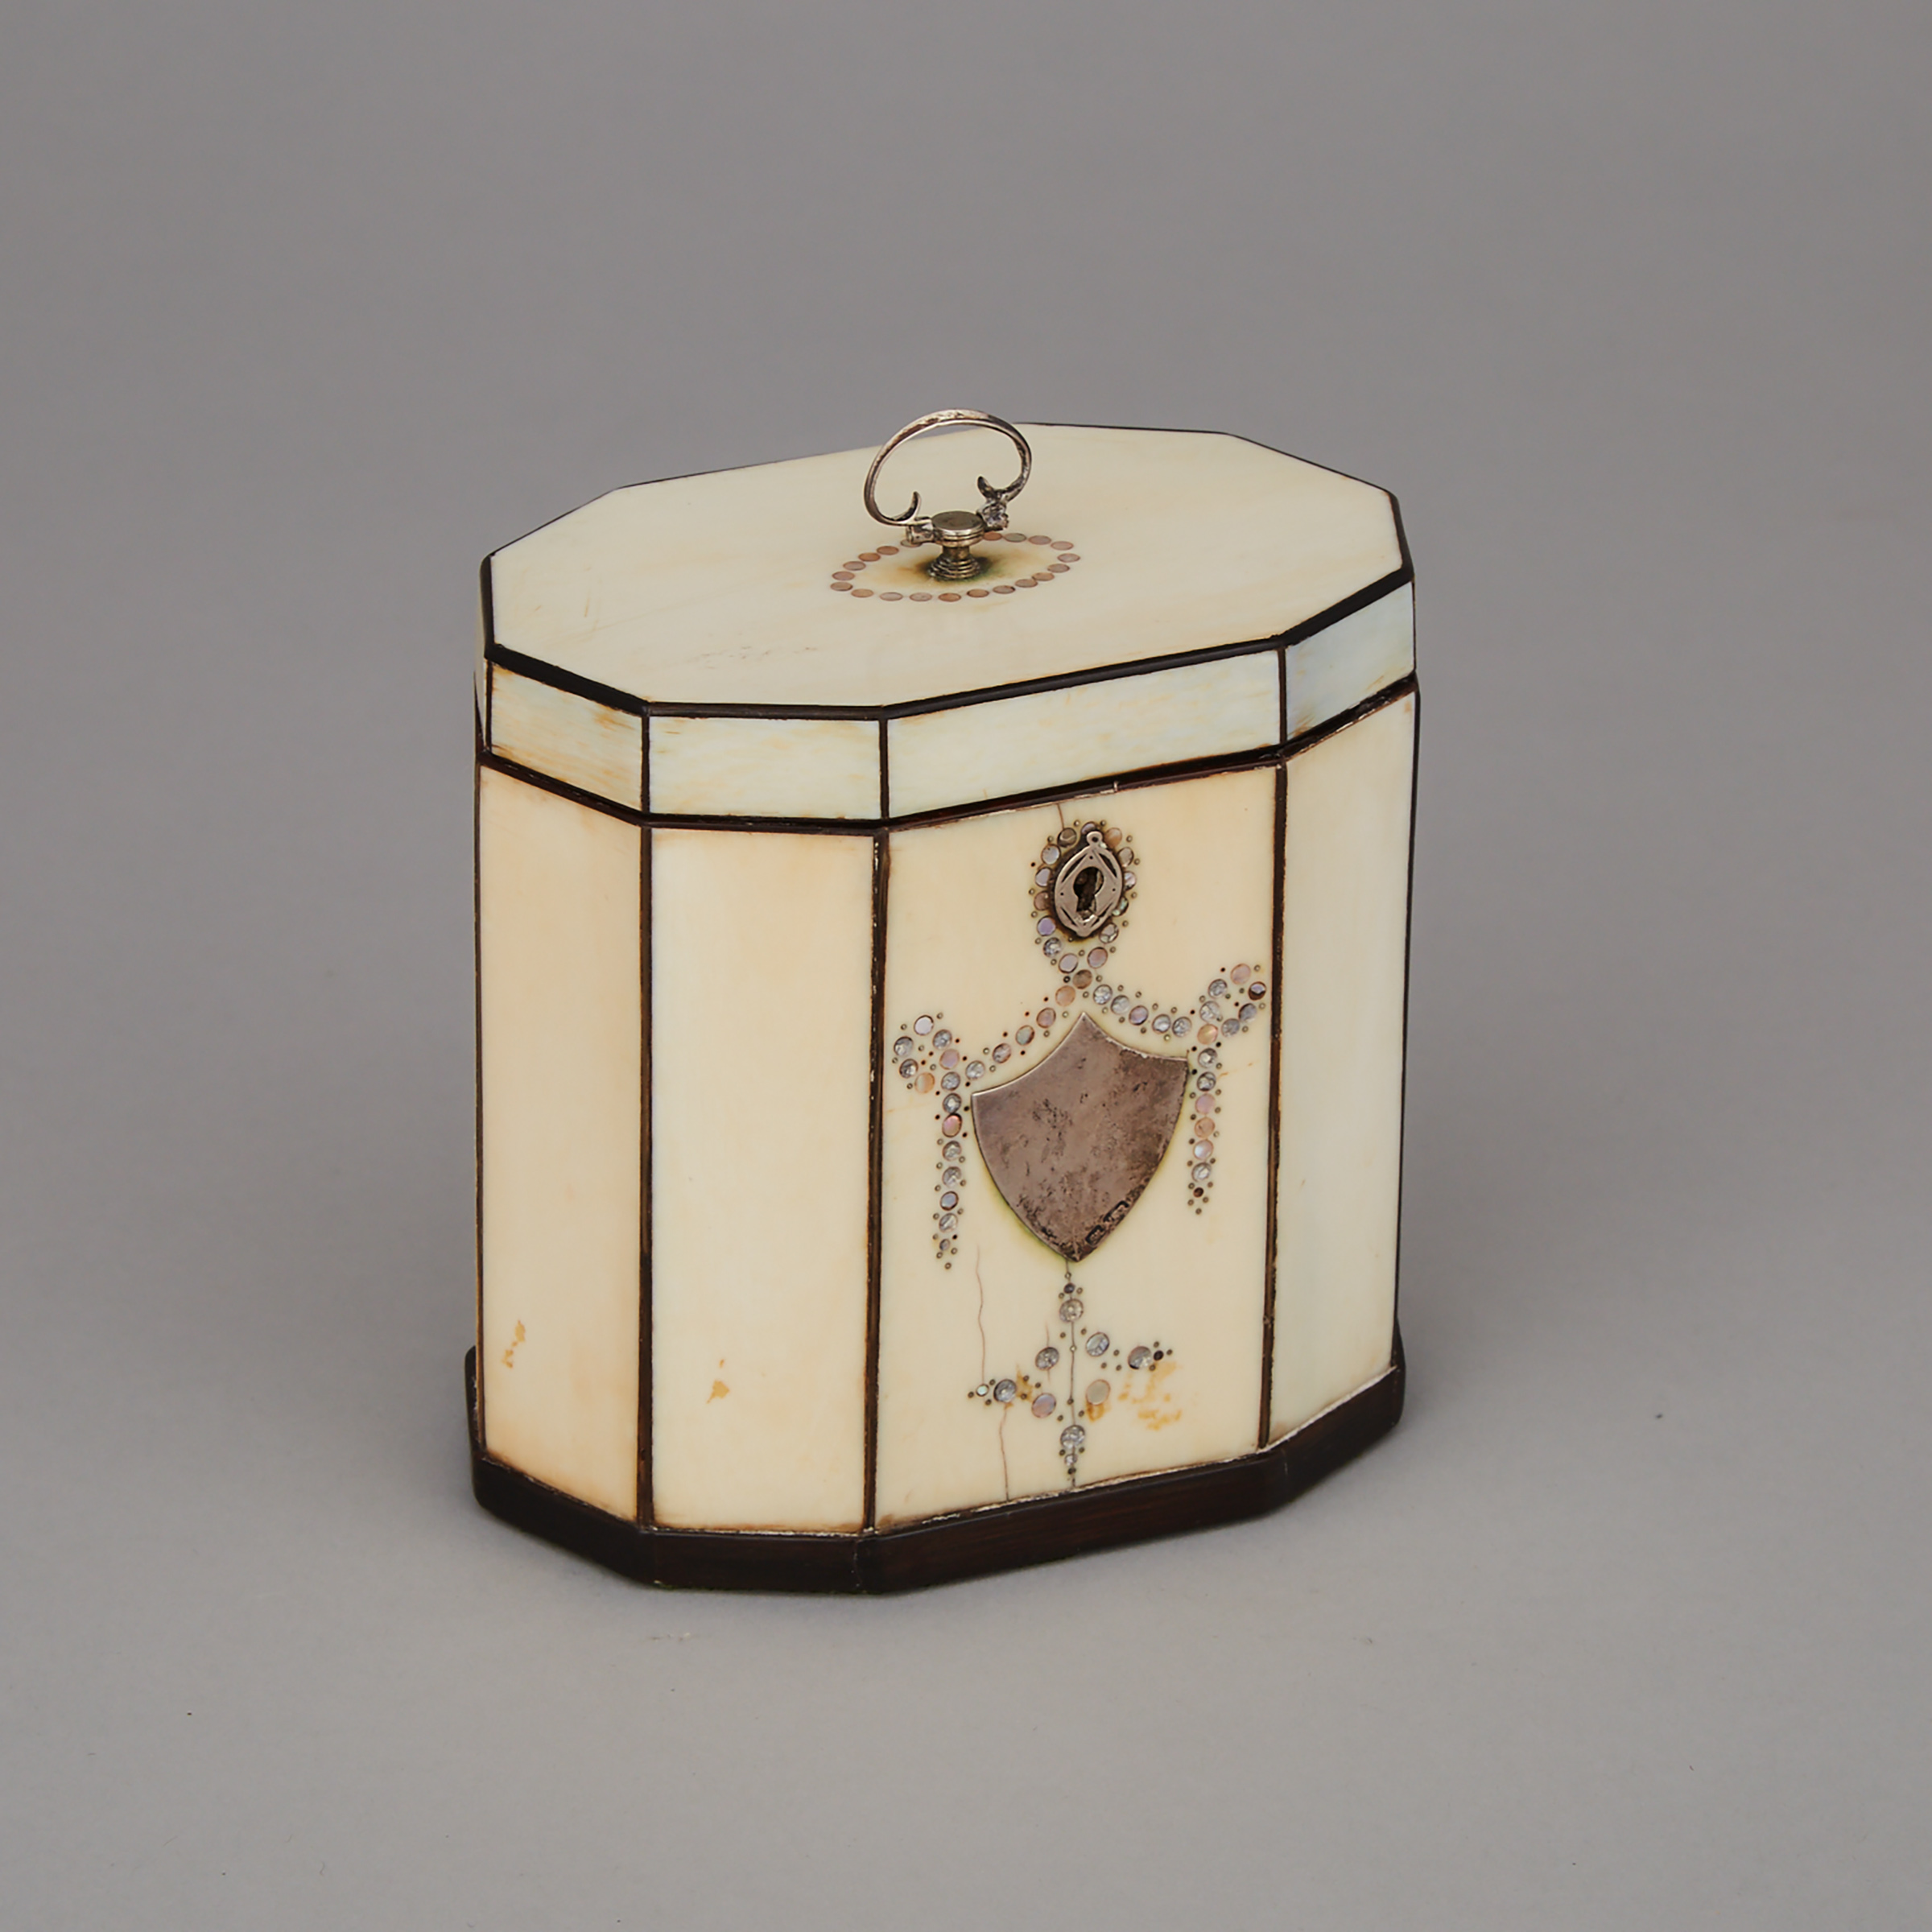 Anglo-Indian Ebony Strung Ivory Veneered Octagonal Tea Caddy, early 19th century